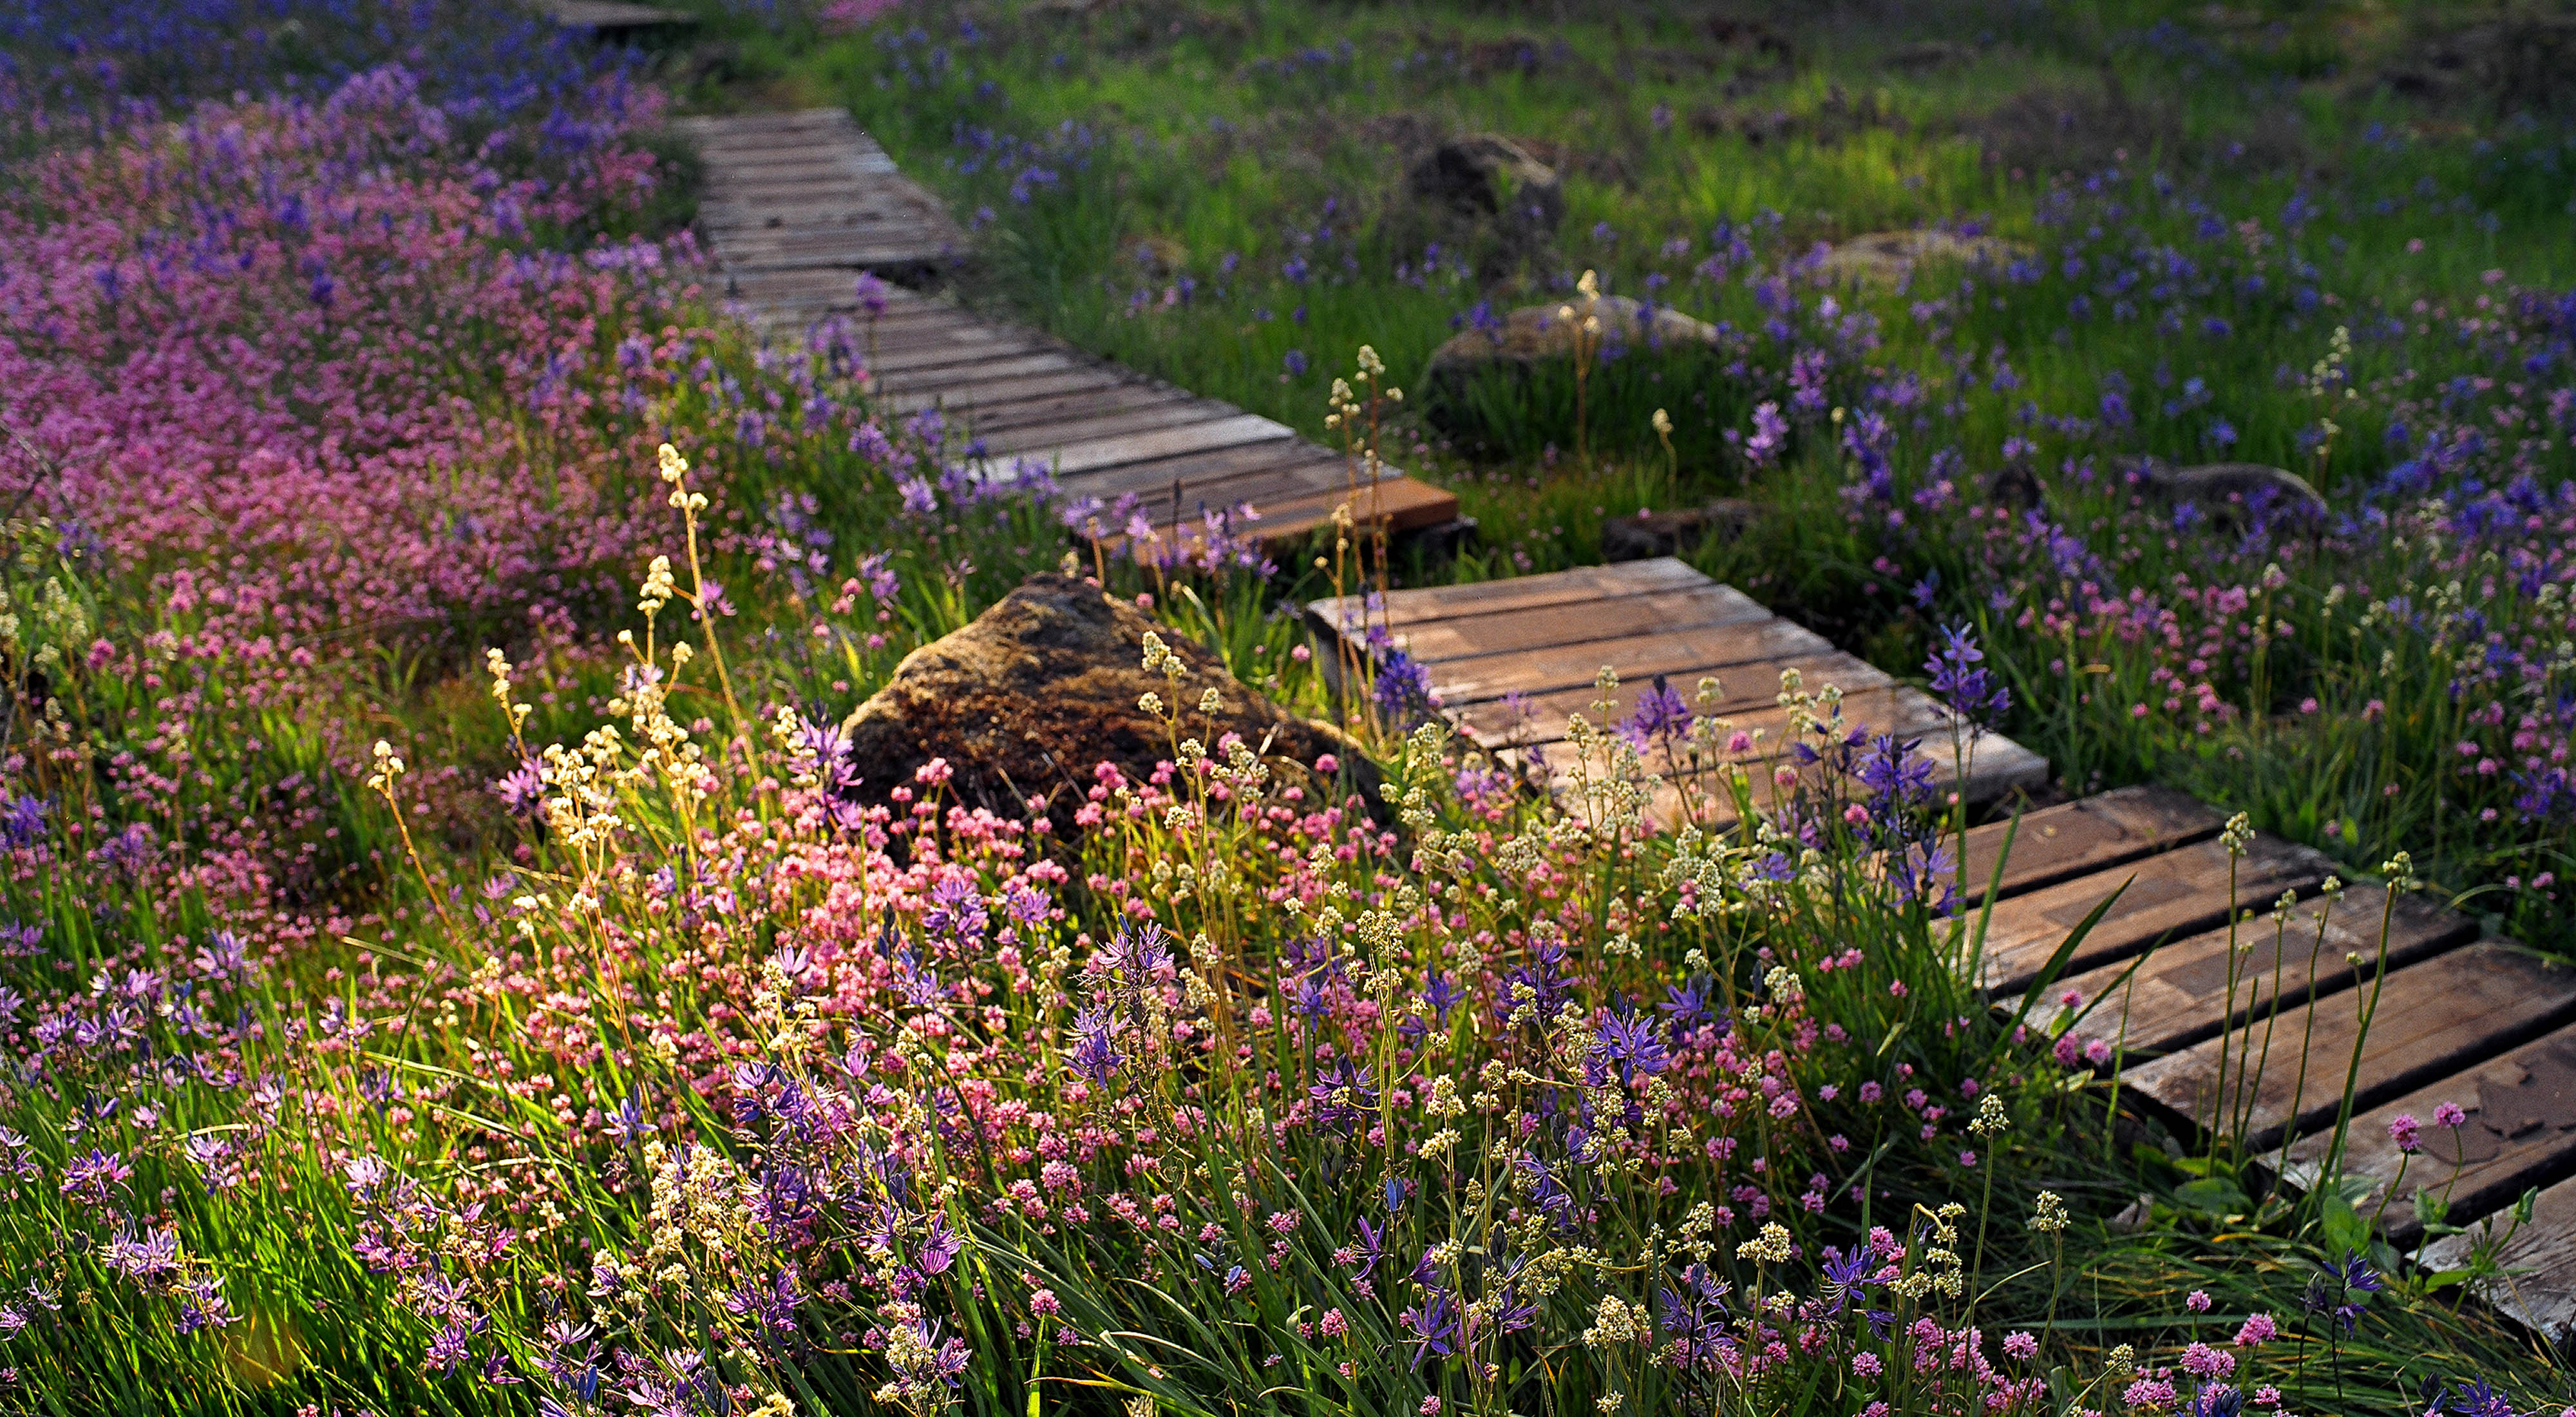 Purple camas lilies, alongside rosy plectritus and other native wildflowers, lining a boardwalk in Camassia Natural Area’s wet meadows.